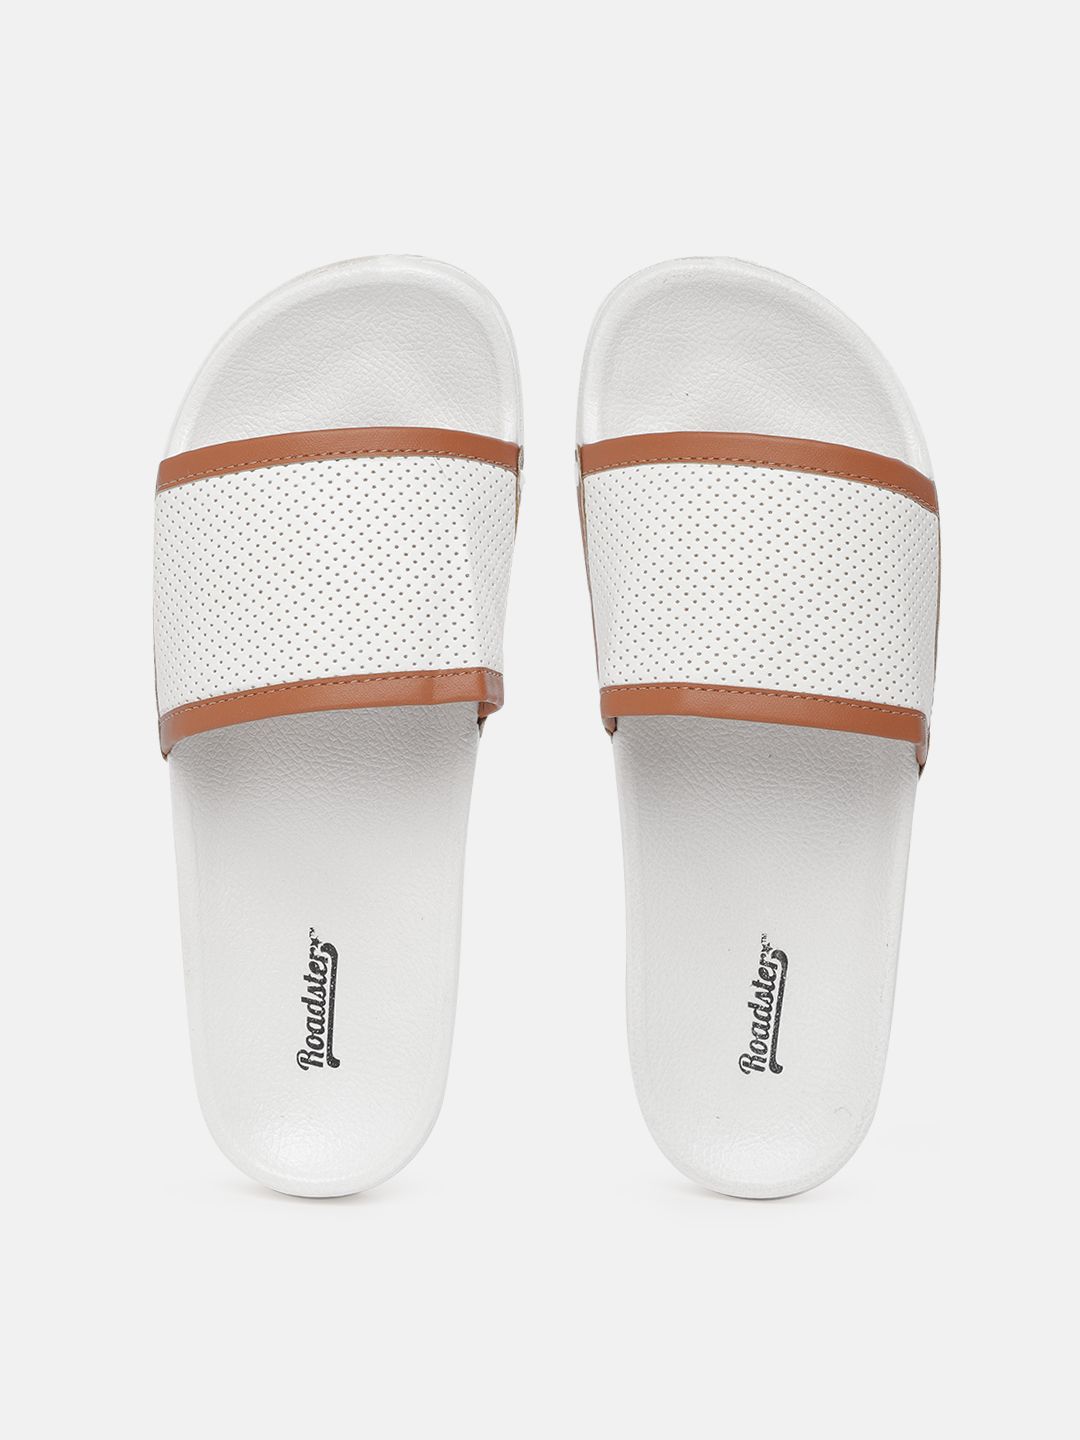 Roadster Women White Perforated Sliders Price in India